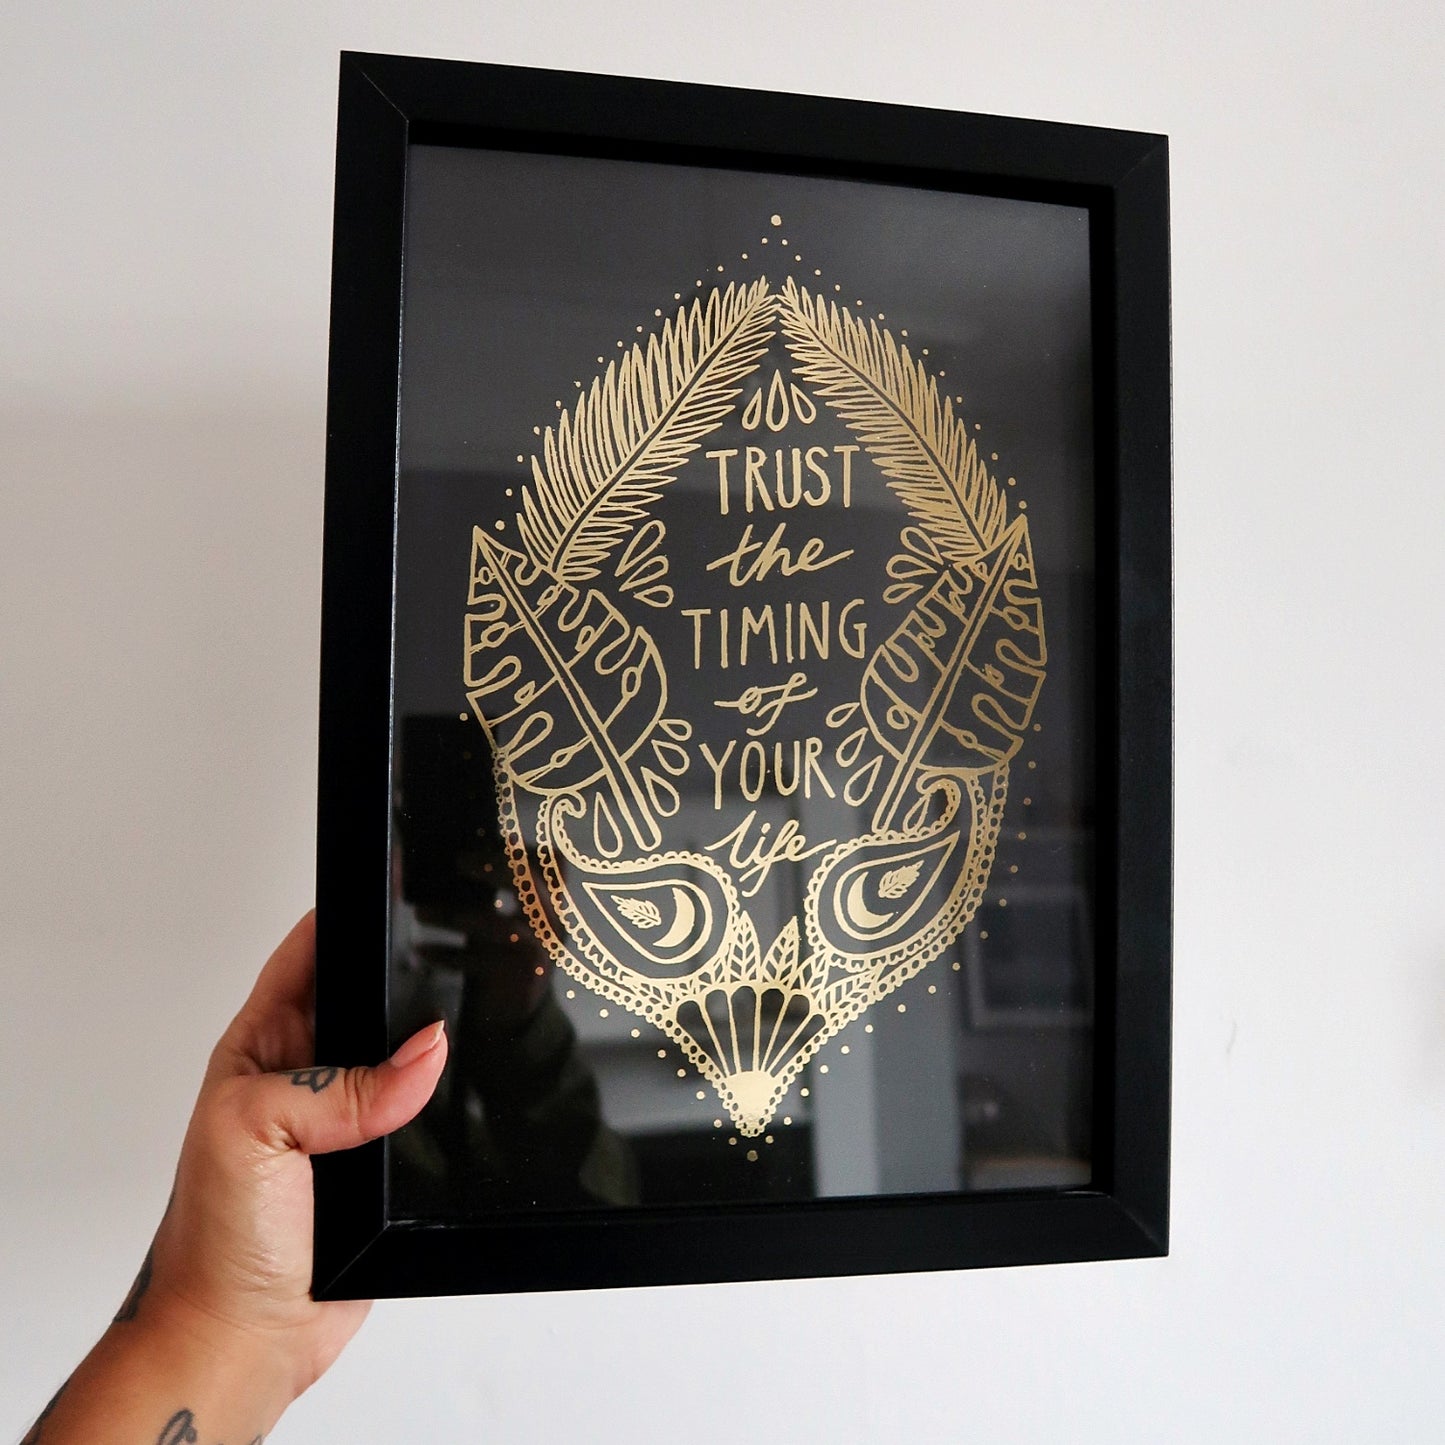 trust the timing of your life - metallic gold - A4 print